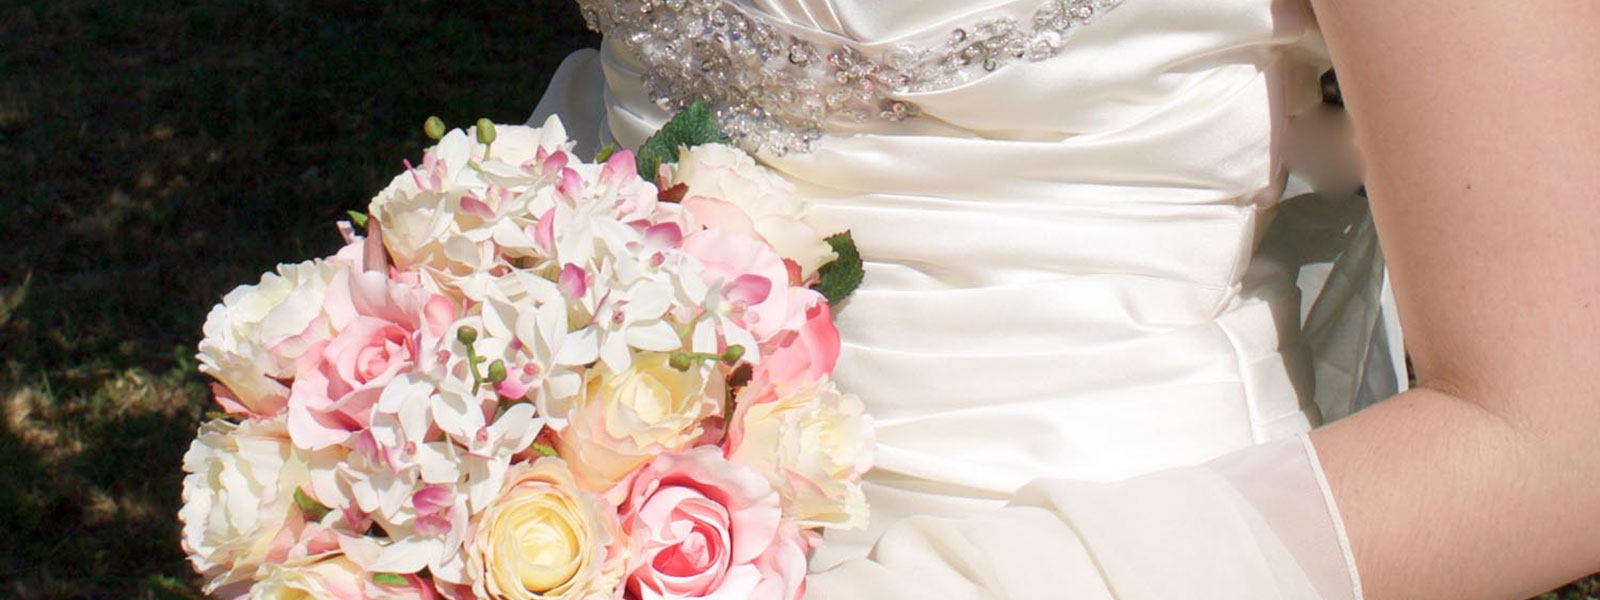 Your personalised bridal bouquet for the wedding